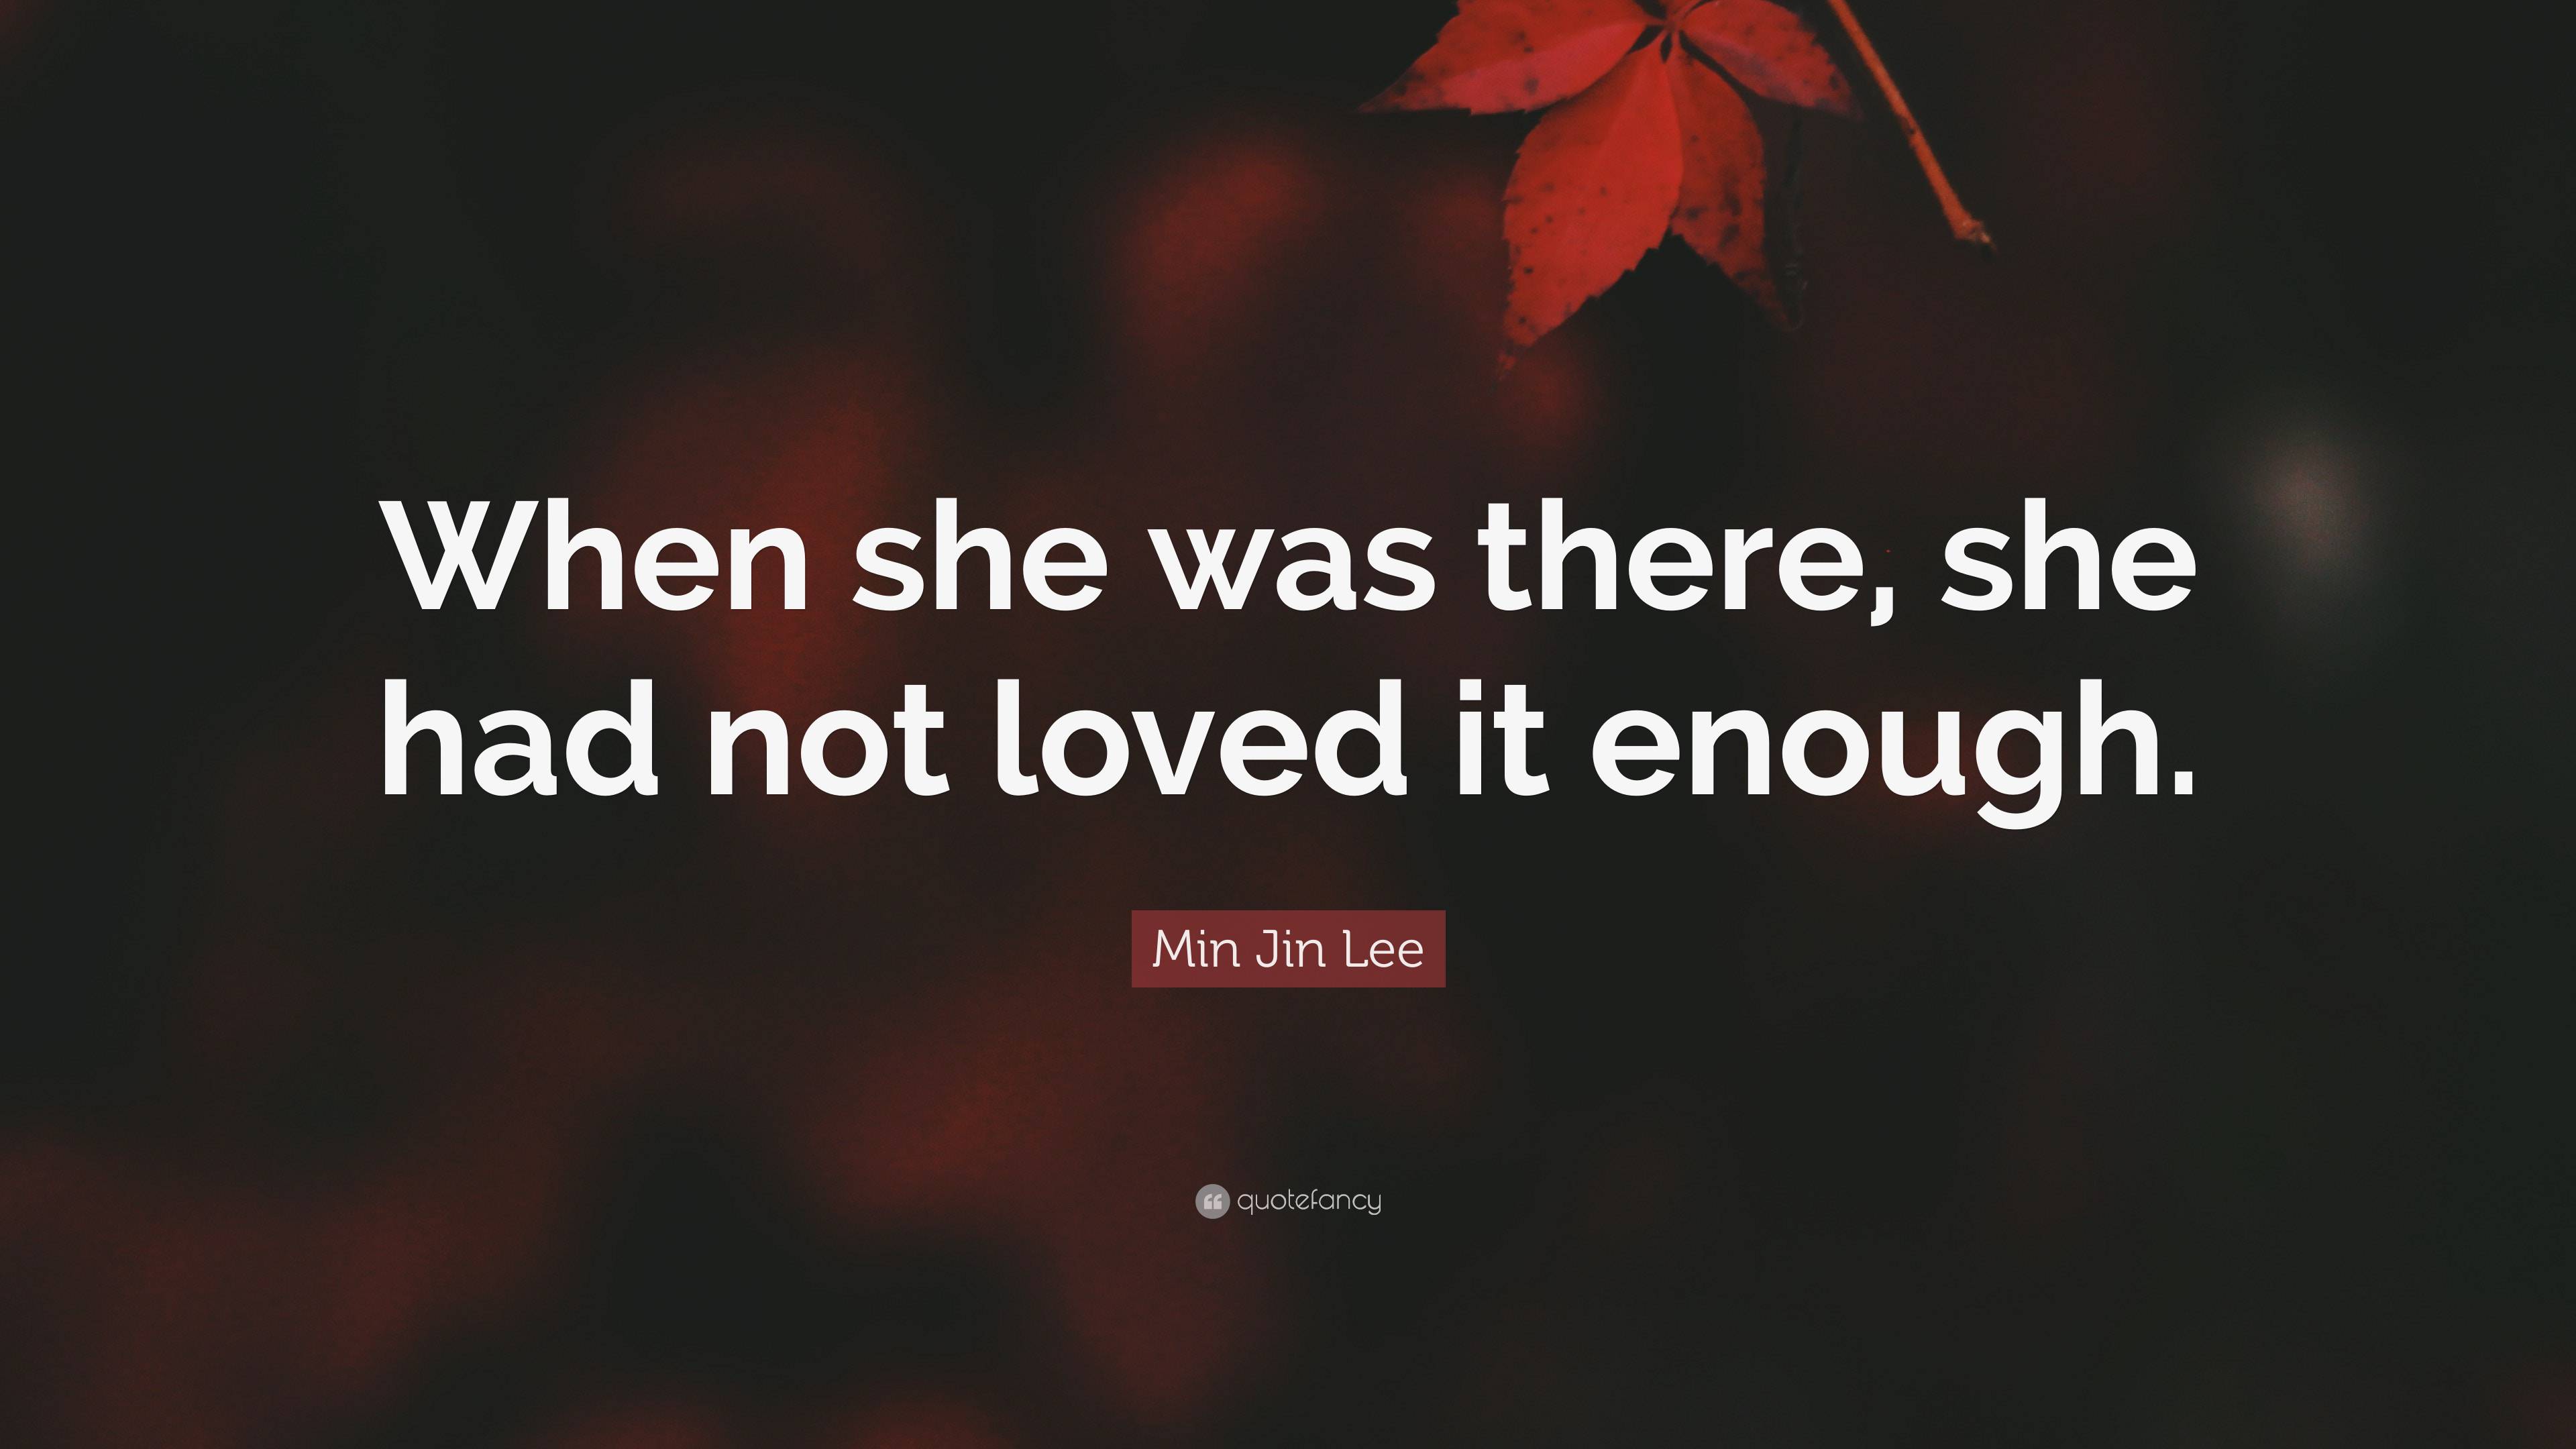 Min Jin Lee Quote: “When she was there, she had not loved it enough.”